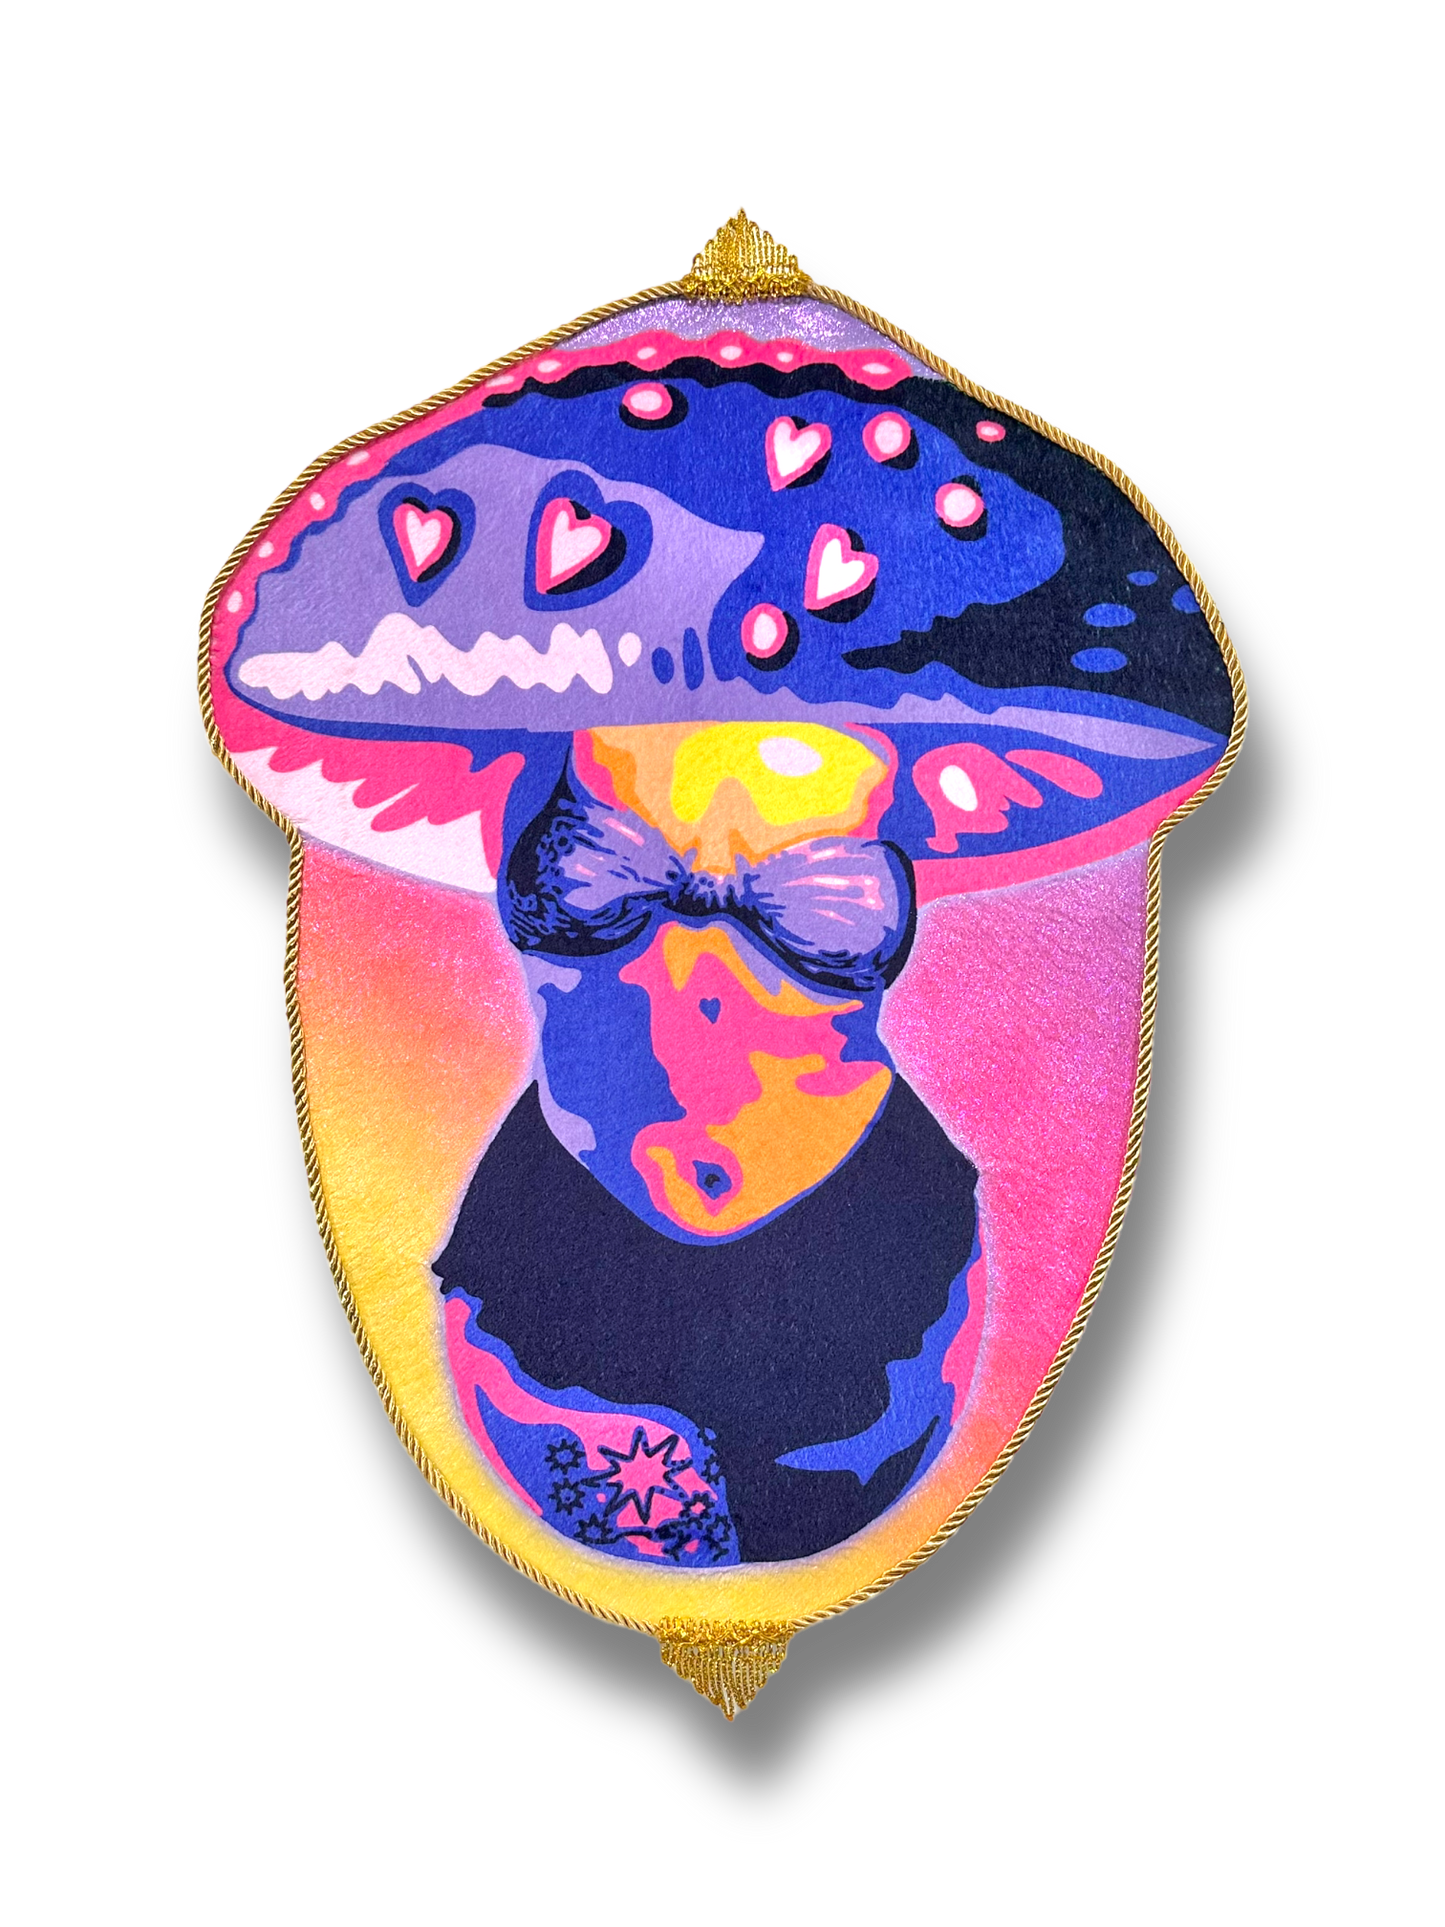 ⏳(Not sold out) WAITLIST 🗓️ for Future Customized Velveteen Mushroom Portrait Tapestry✨